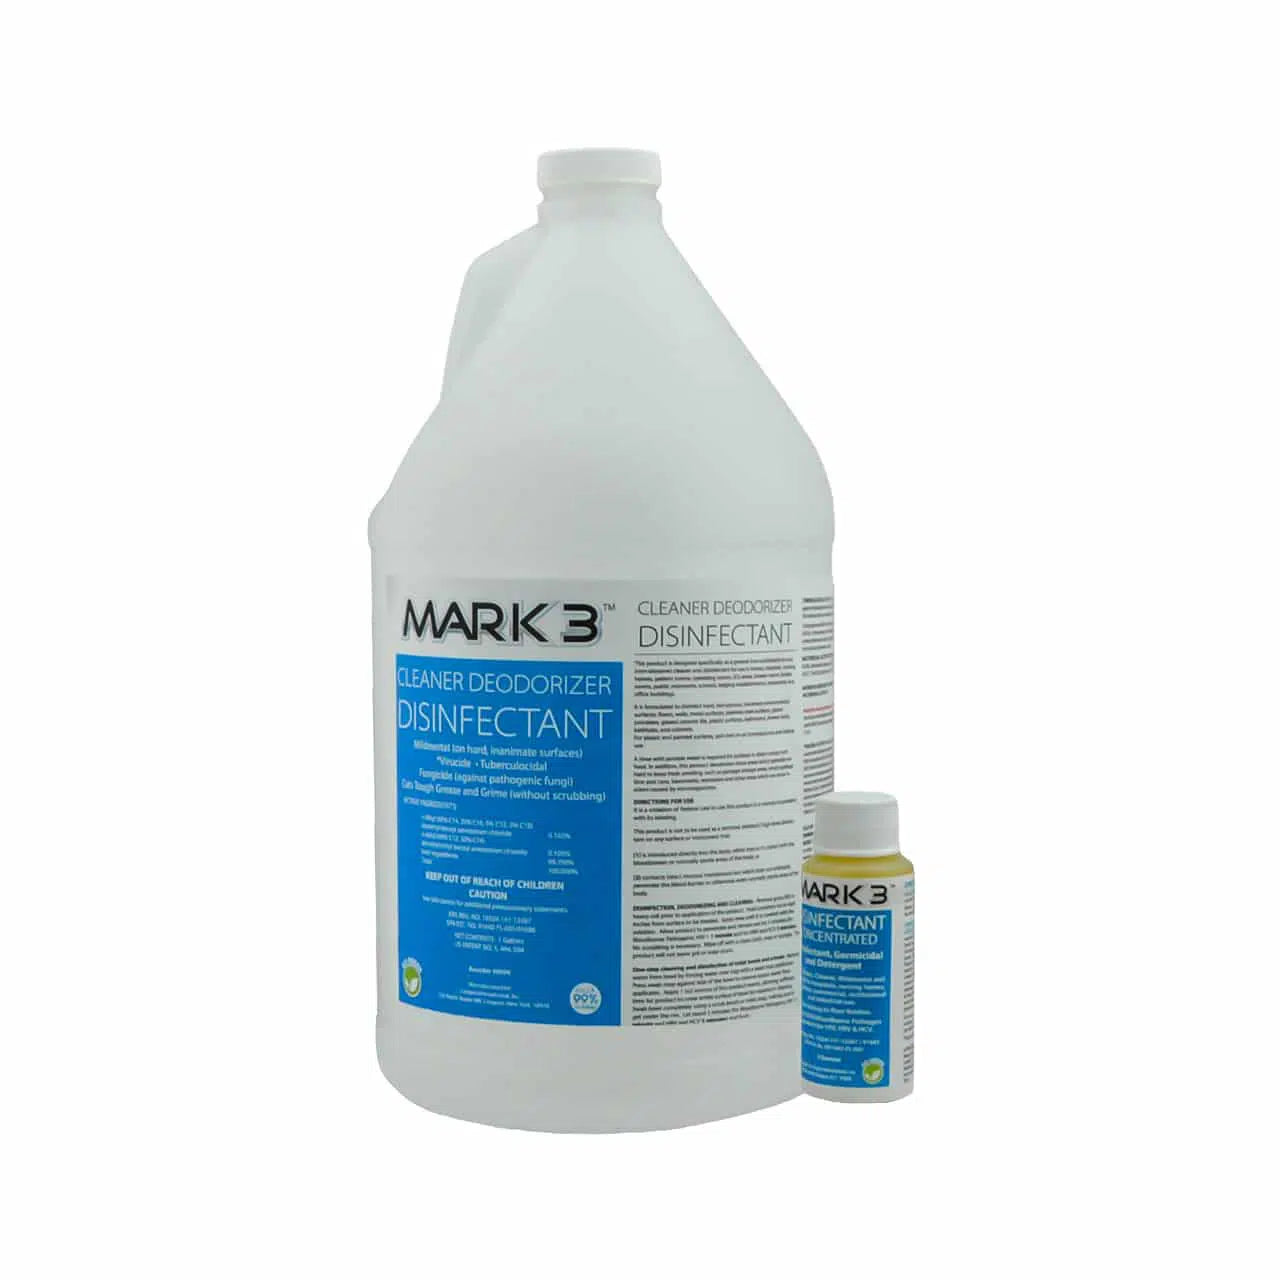 MARK3 Germicidal Disinfectant Cleaner